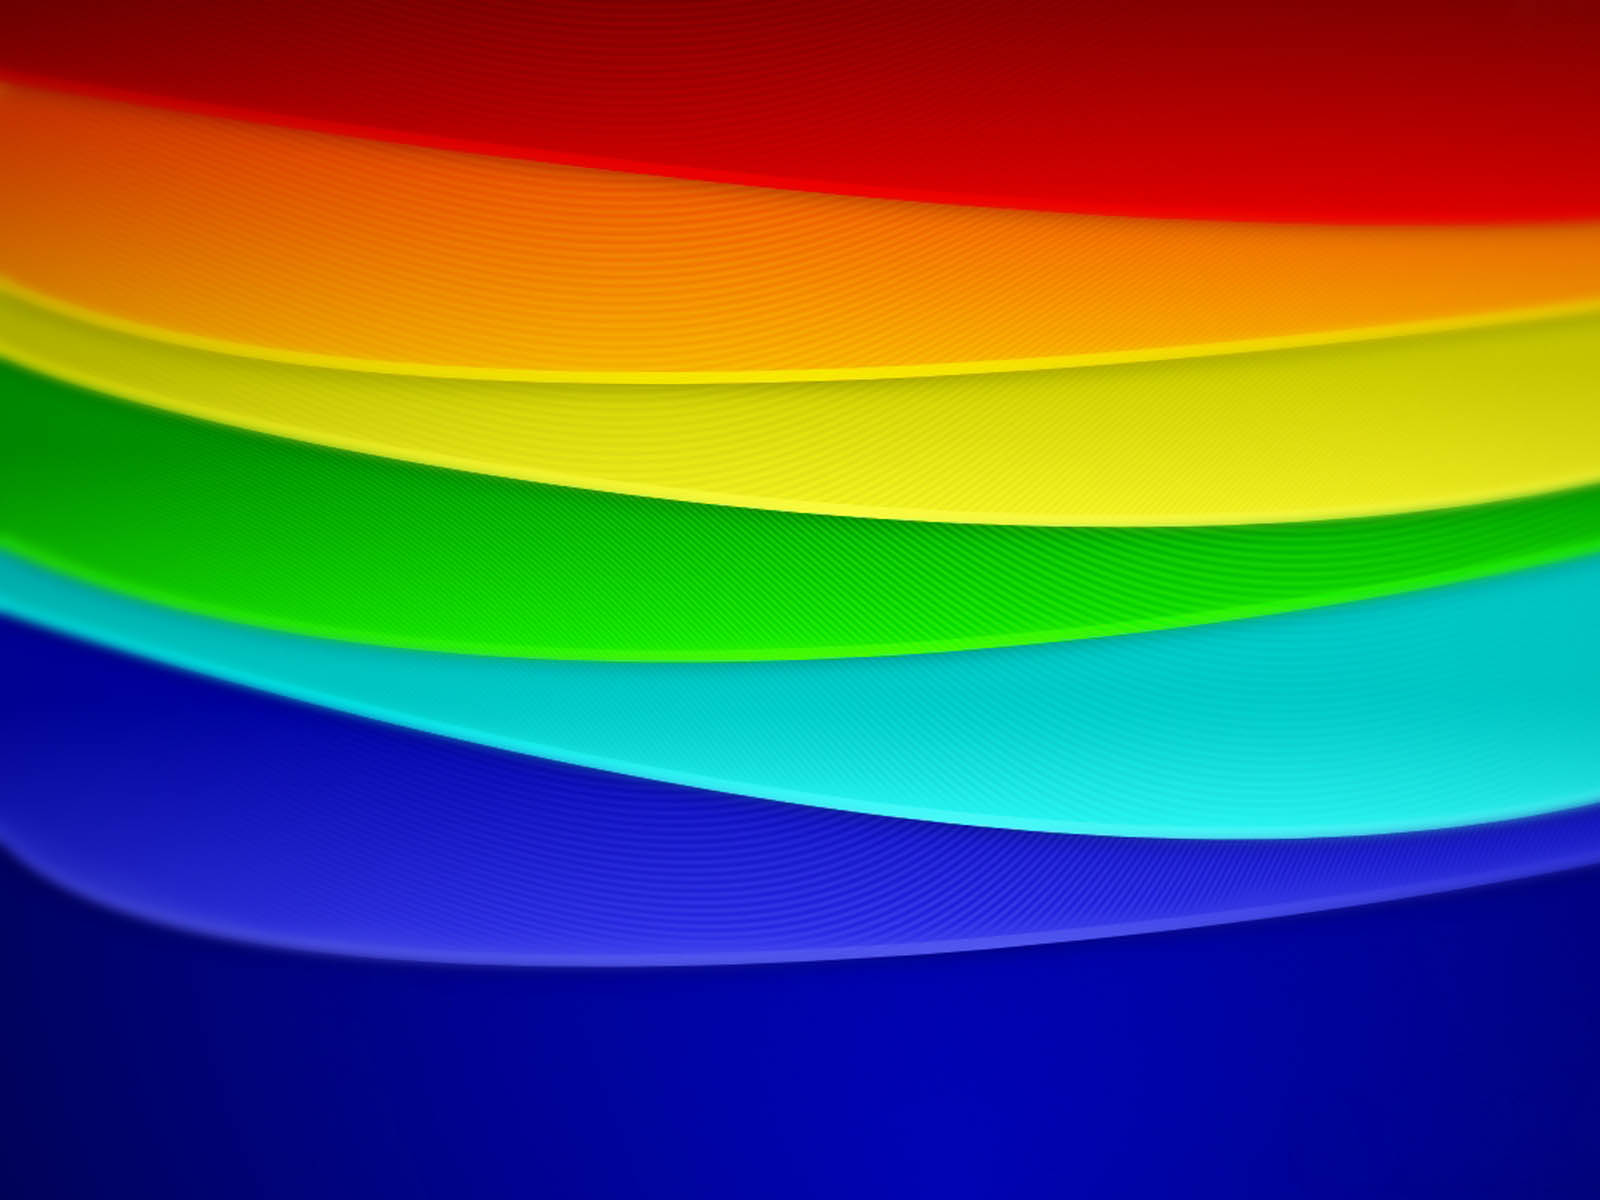 Rainbow Abstract Backgrounds Hd Wallpapers in Abstract Imagesci